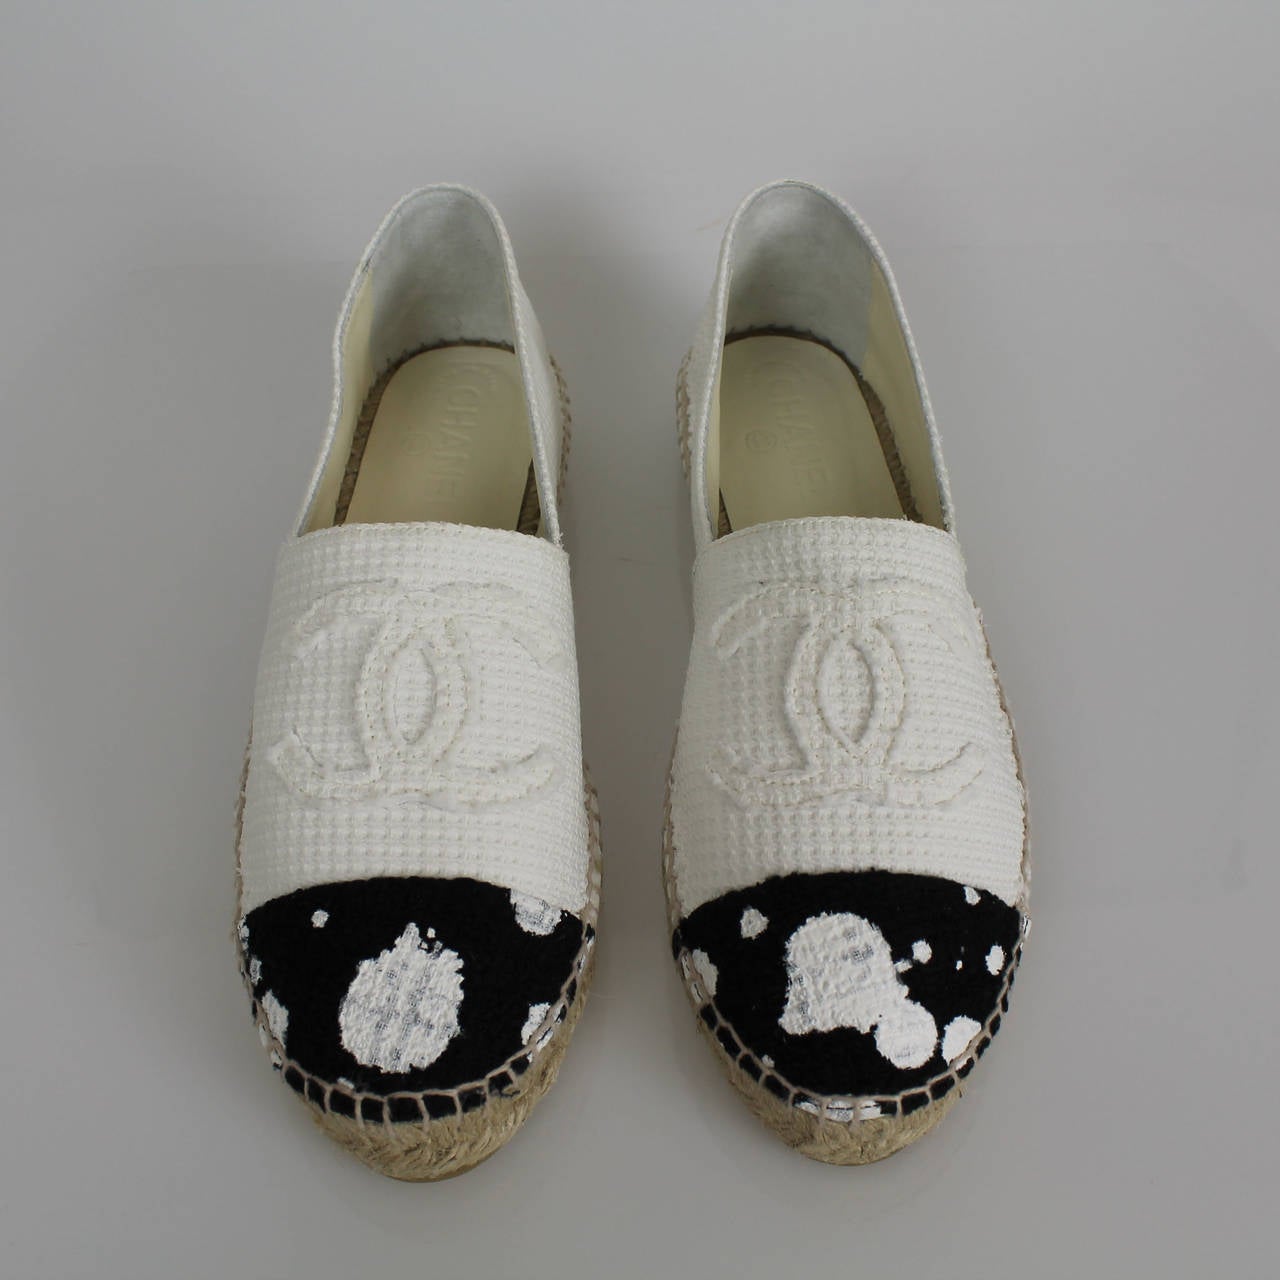 This is an authentic pair of CHANELTweed Espadrilles 41 in White. These espadrilles have a slim mid sole with uppers of White tweed with a Chanel CC logo. Dalmation balck and white print cap toe. These are marvelous espadrilles for a more natural